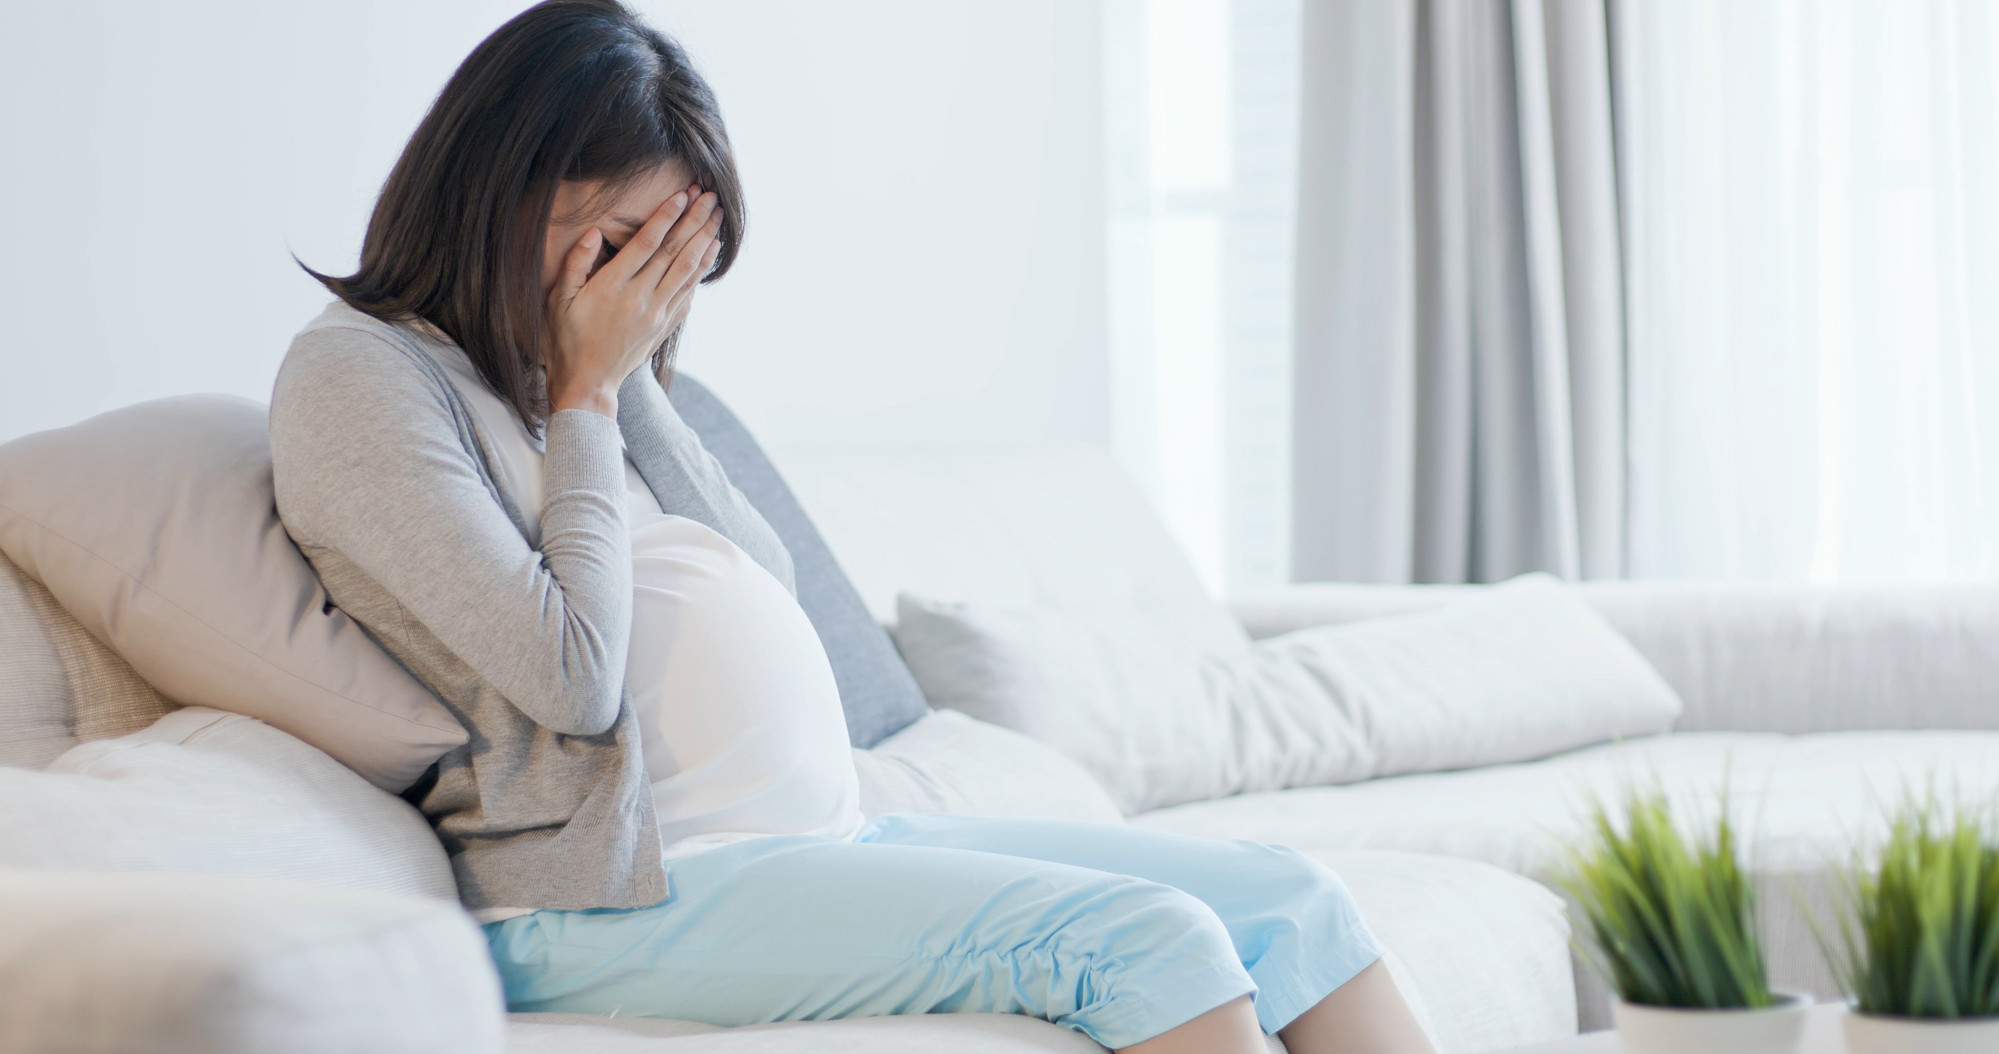 People on mainland social media have been shocked by the plight of the pregnant tenant. Photo: Shutterstock